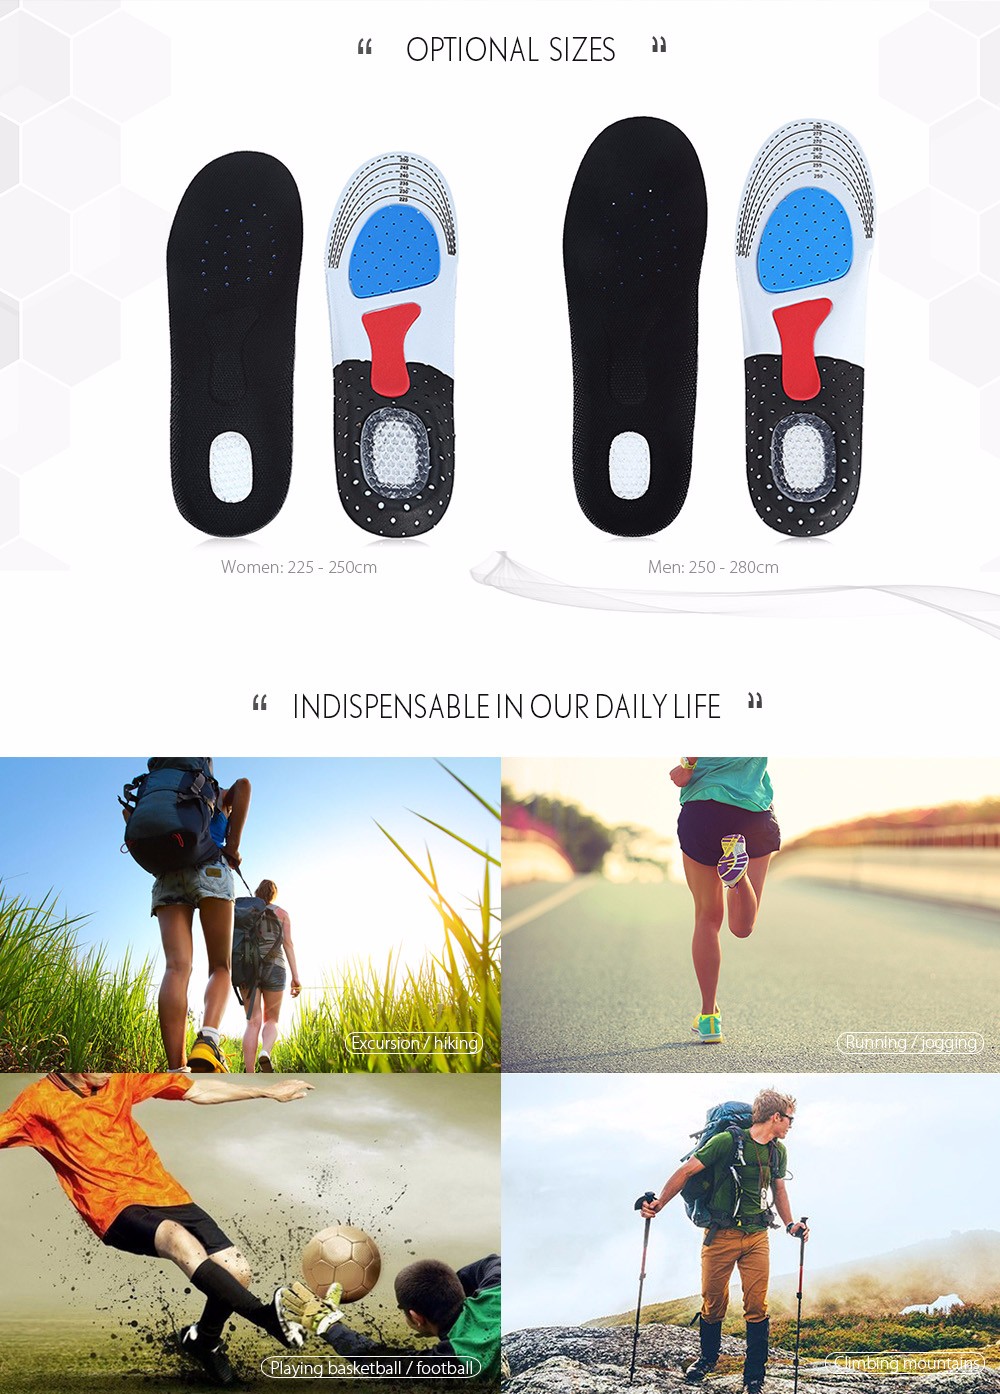 Outdoor Cuttable Shock-resistant Running Insoles Shoes Pads